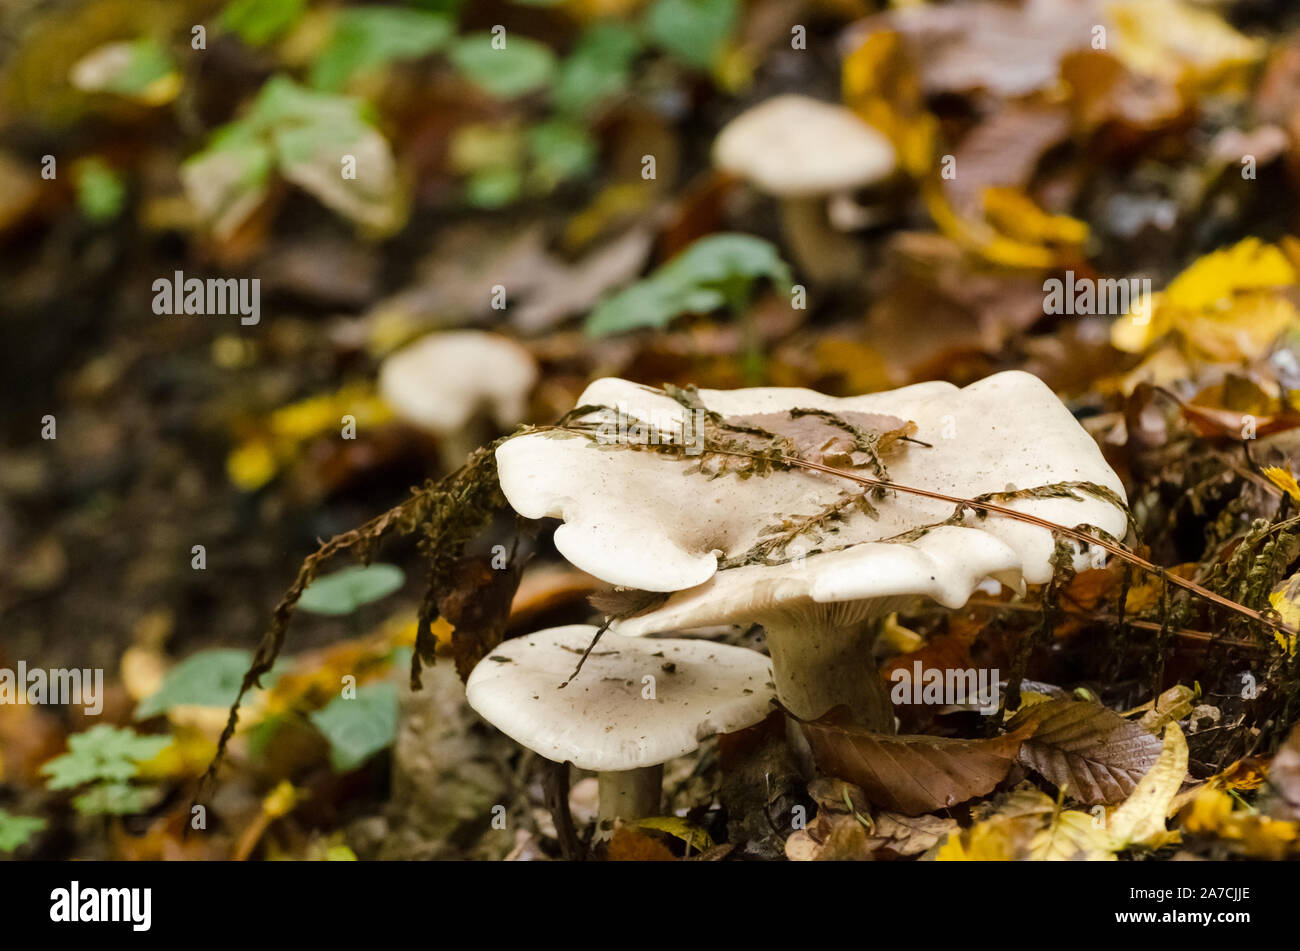 Agaricomycetes, fungi mushrooms in the grass in a forest during autumn in Germany, Western Europe Stock Photo